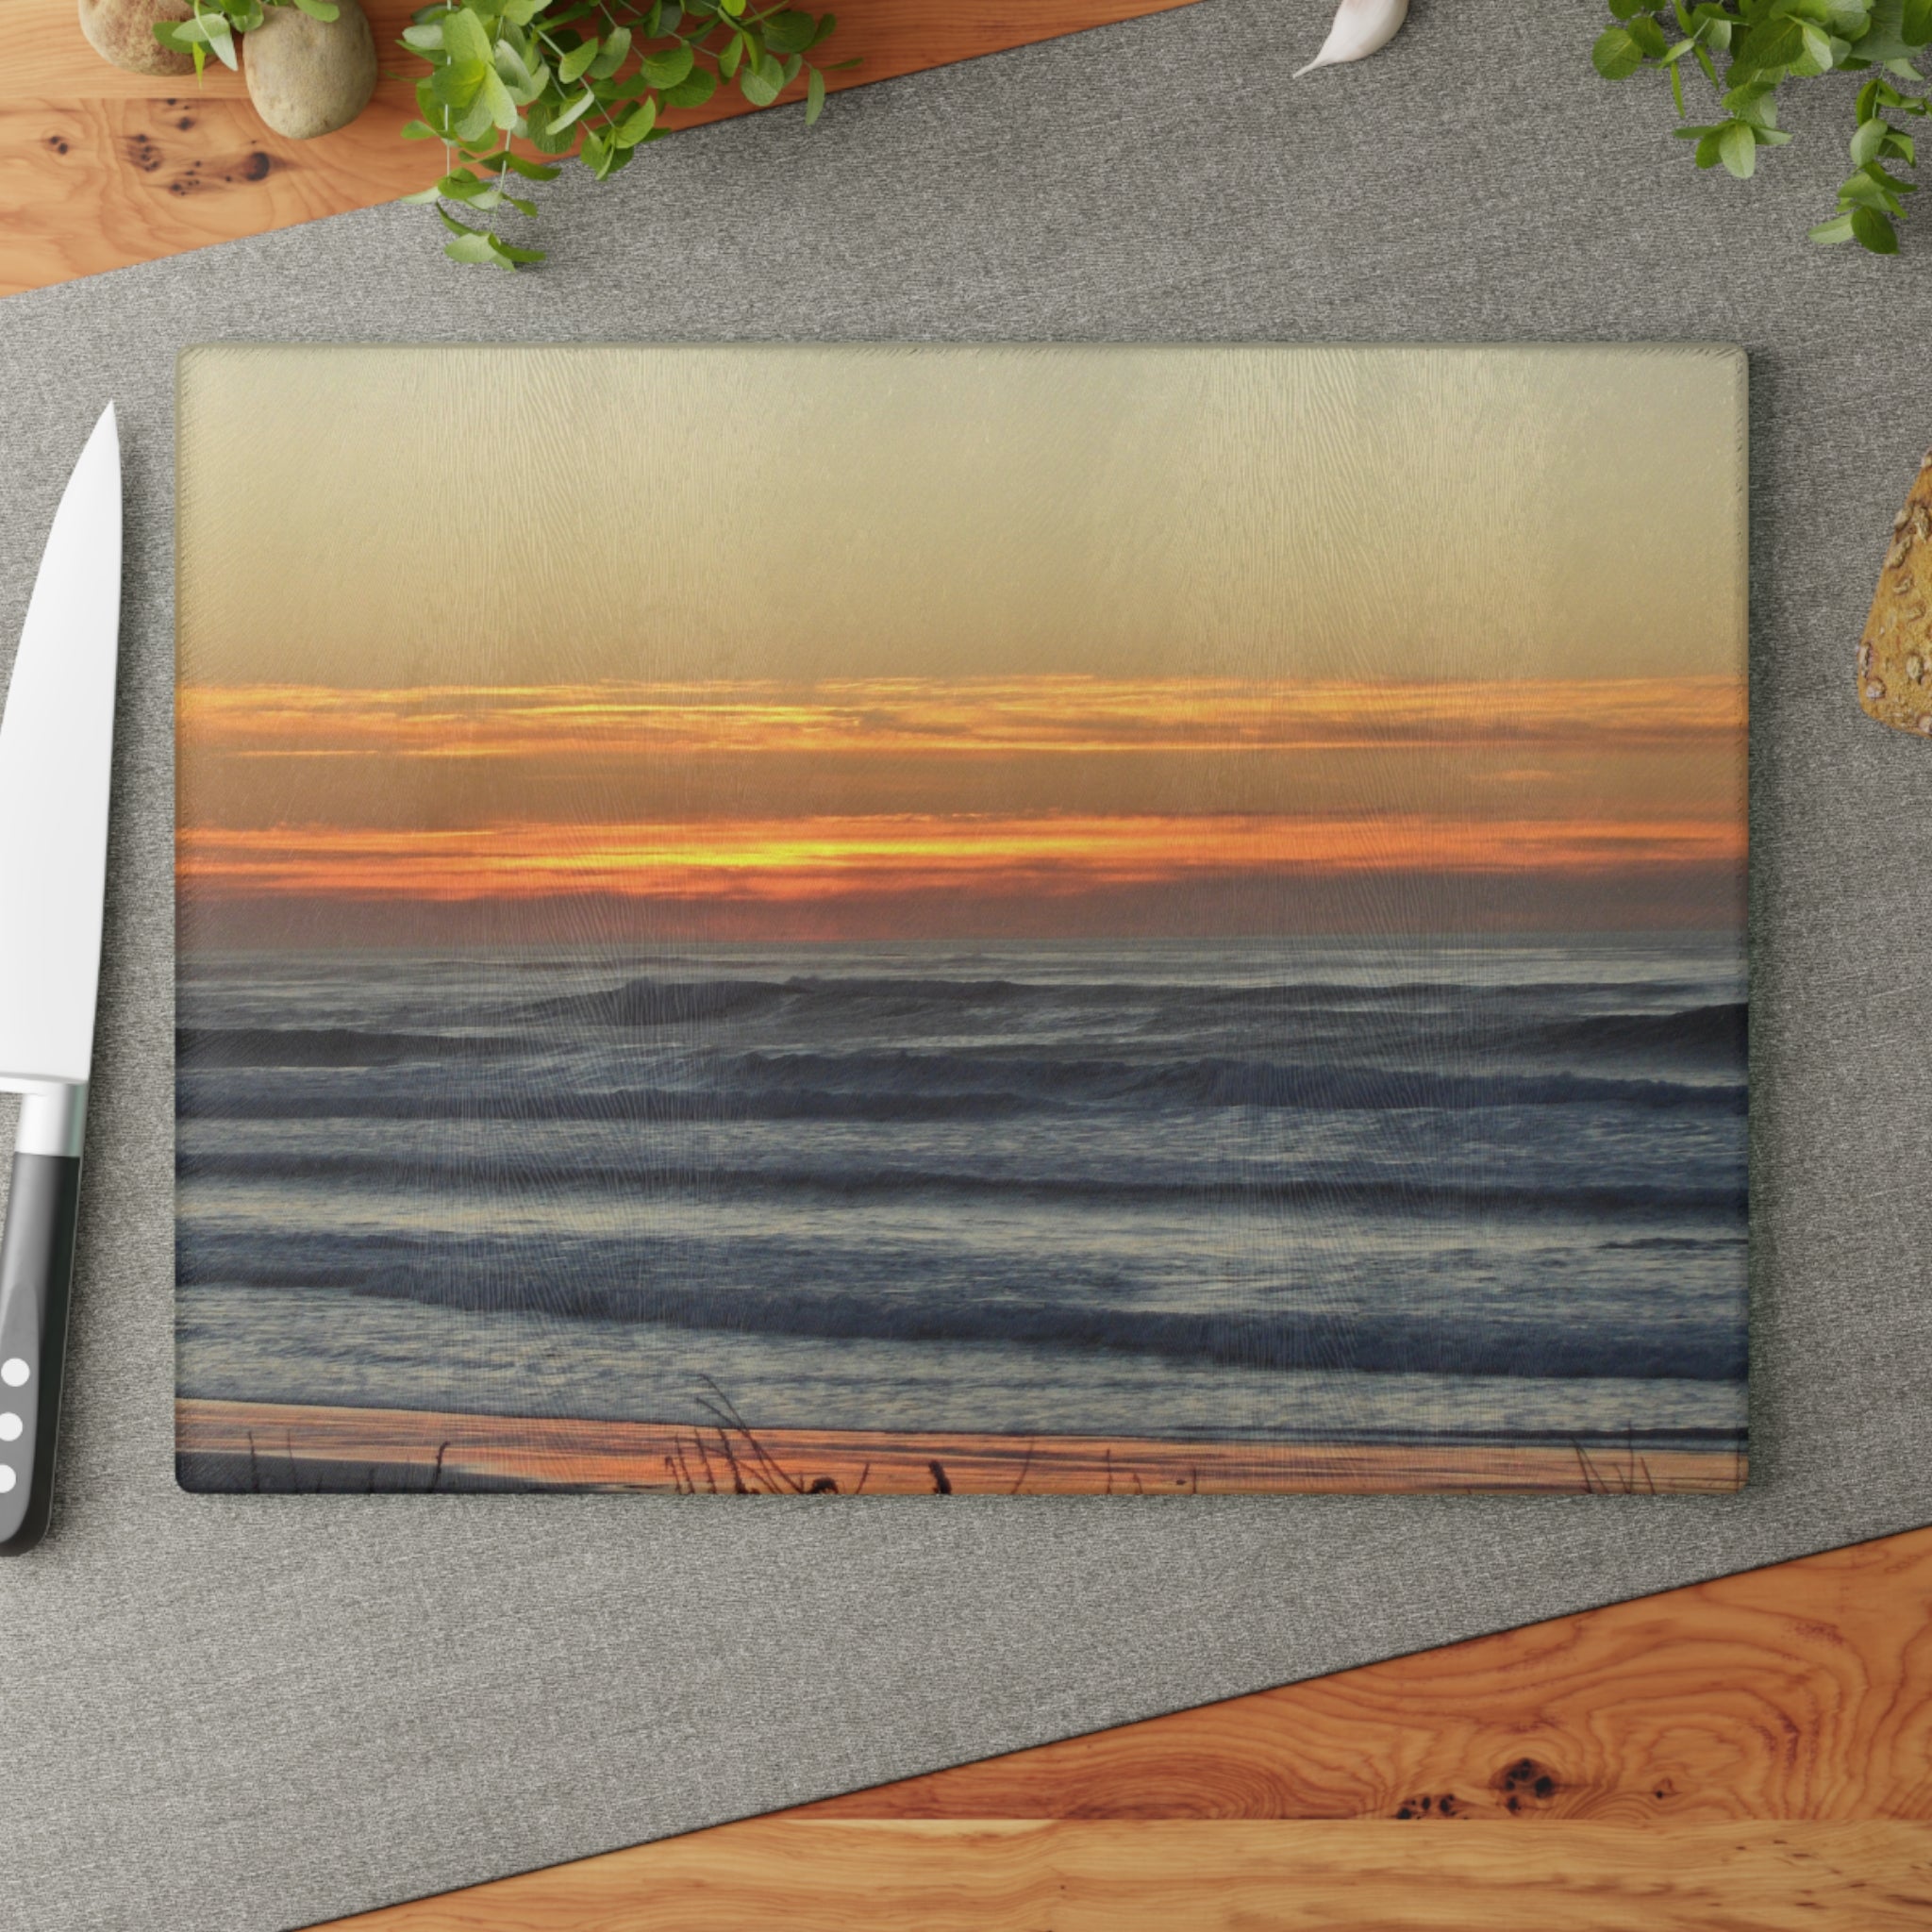 Large glass cutting board with a seascape scene